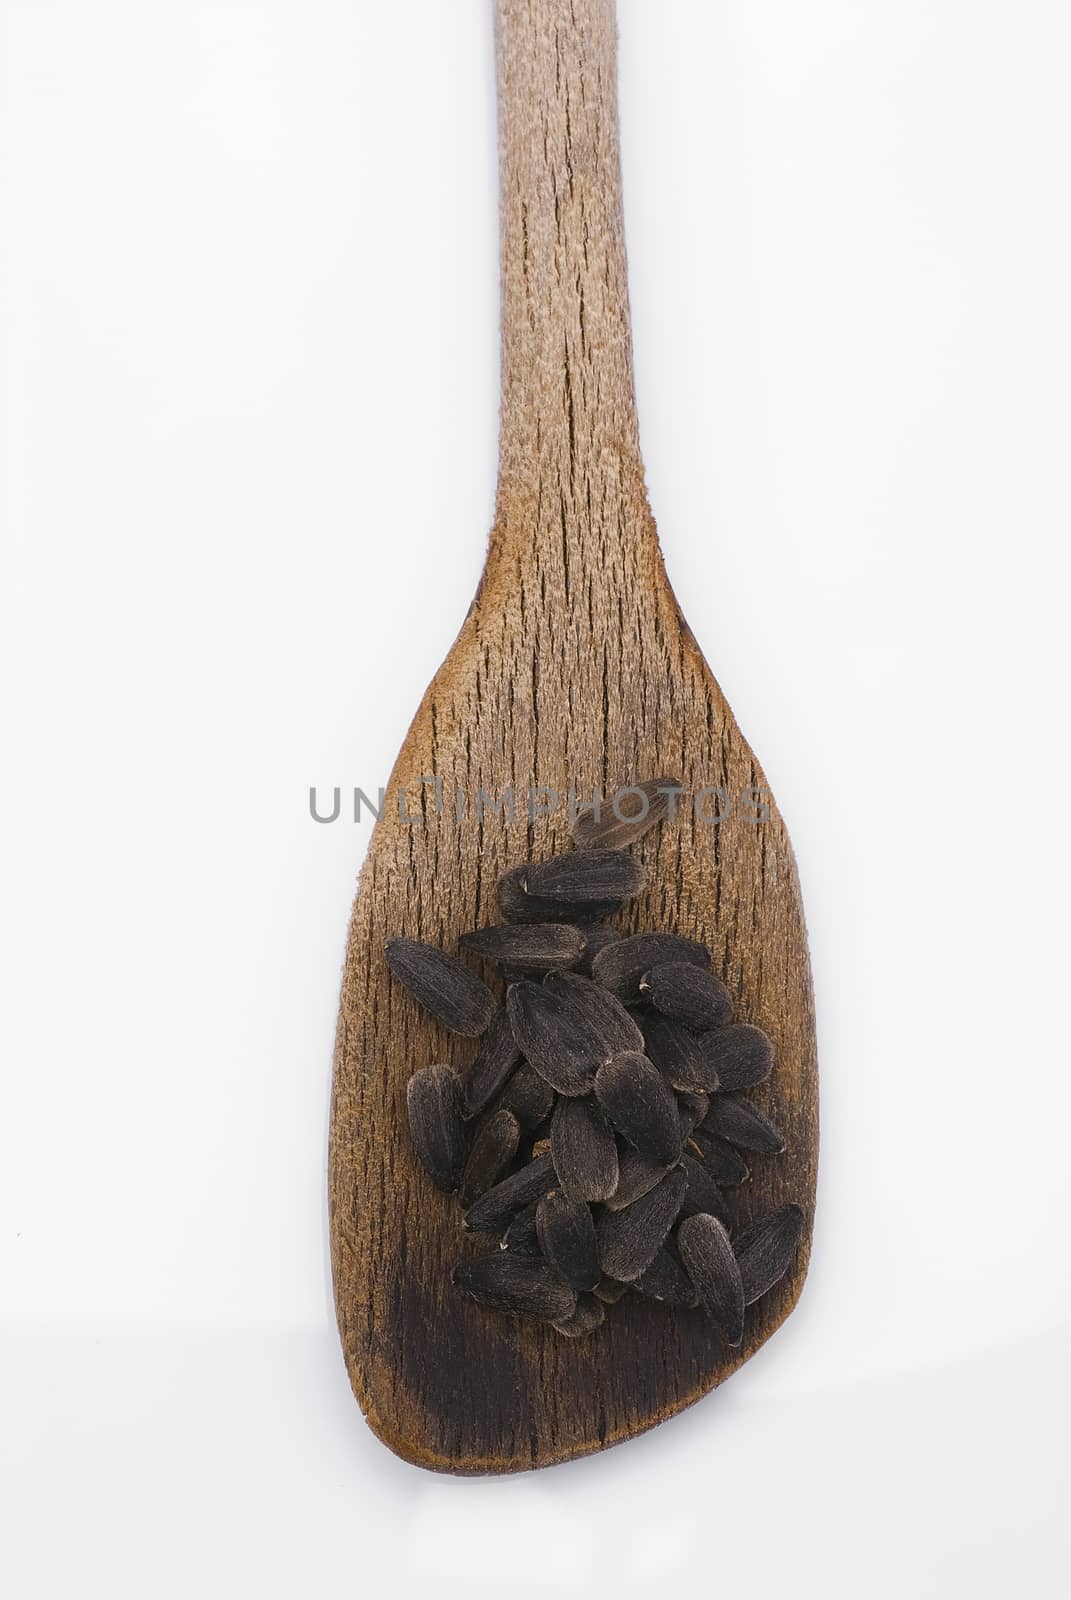 Sunflower seeds with wooden spoon by vainillaychile